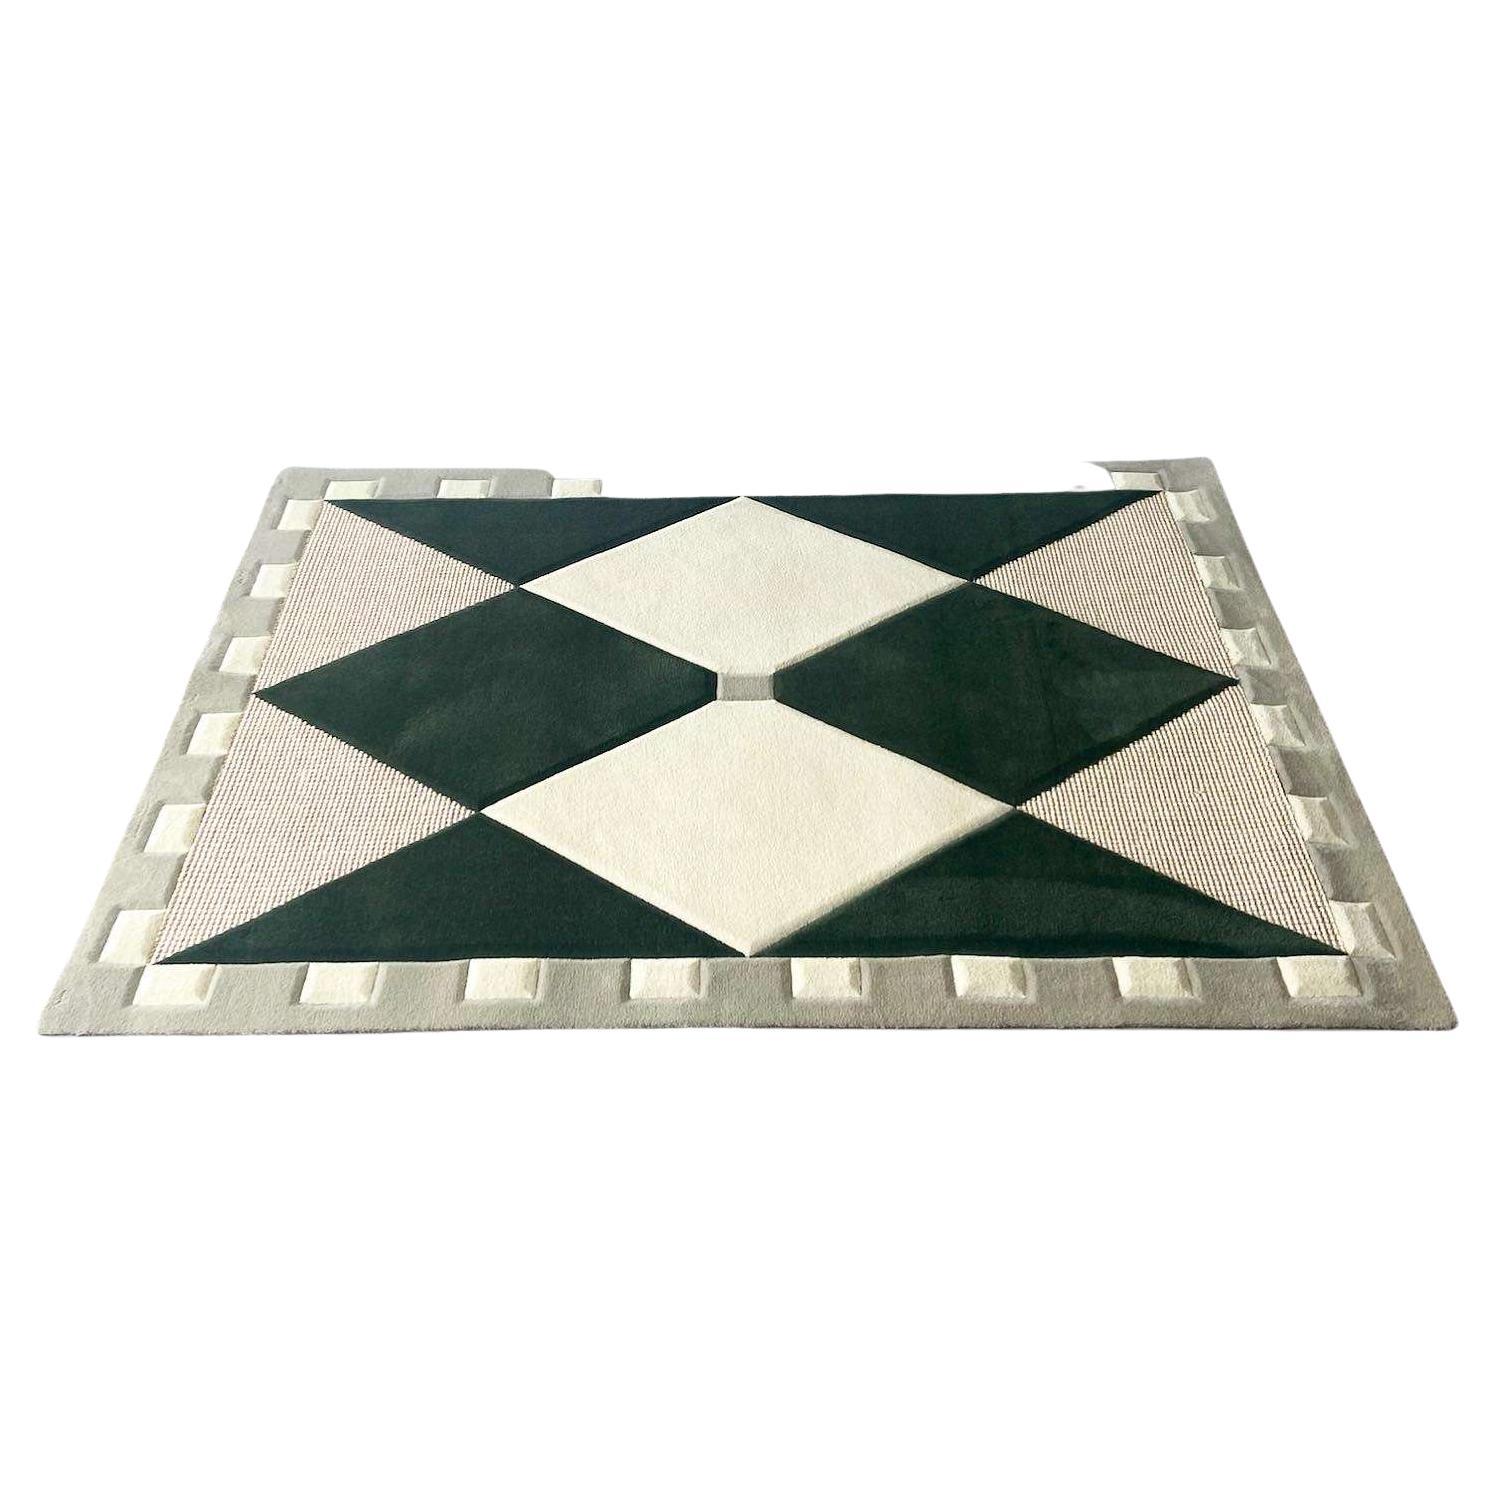 Boho Chic Green, Cream and Natural Weave Rectangular Area Rug For Sale